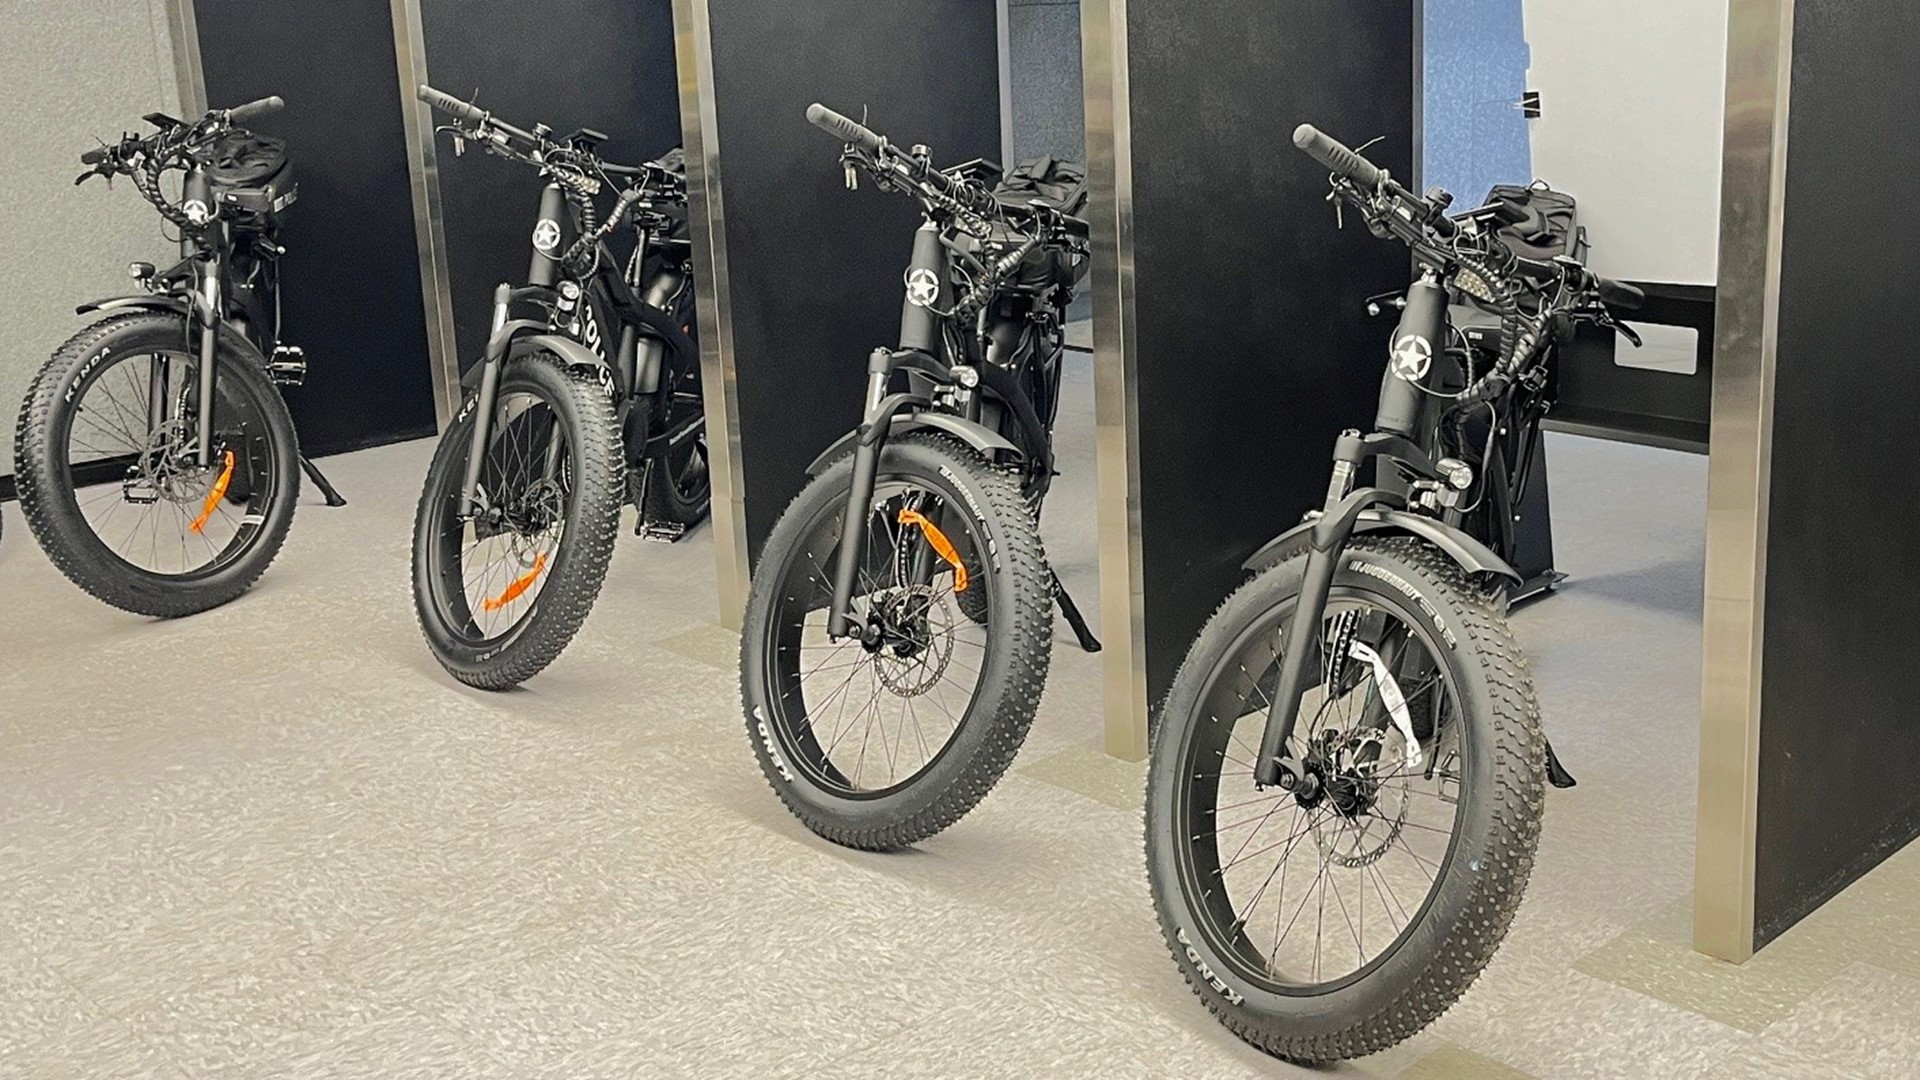 The department showed off the new e-bikes at a news conference Thursday morning.